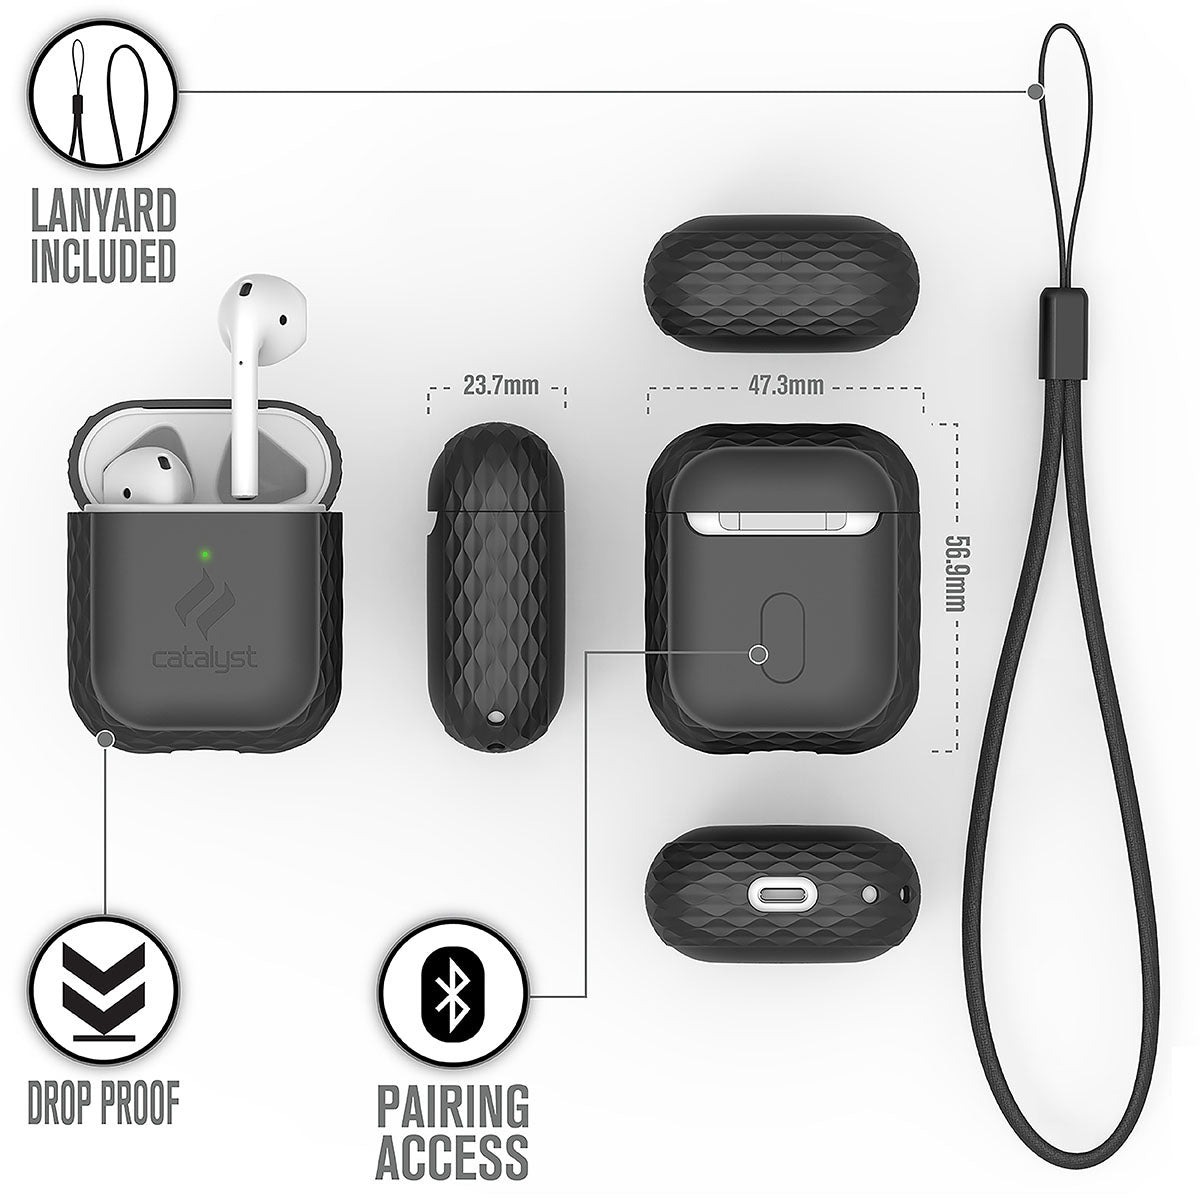 Catalyst airpods gen2/1 case plus lanyard showing the case's different sides and dimension text reads drop proof pairing access lanyard included